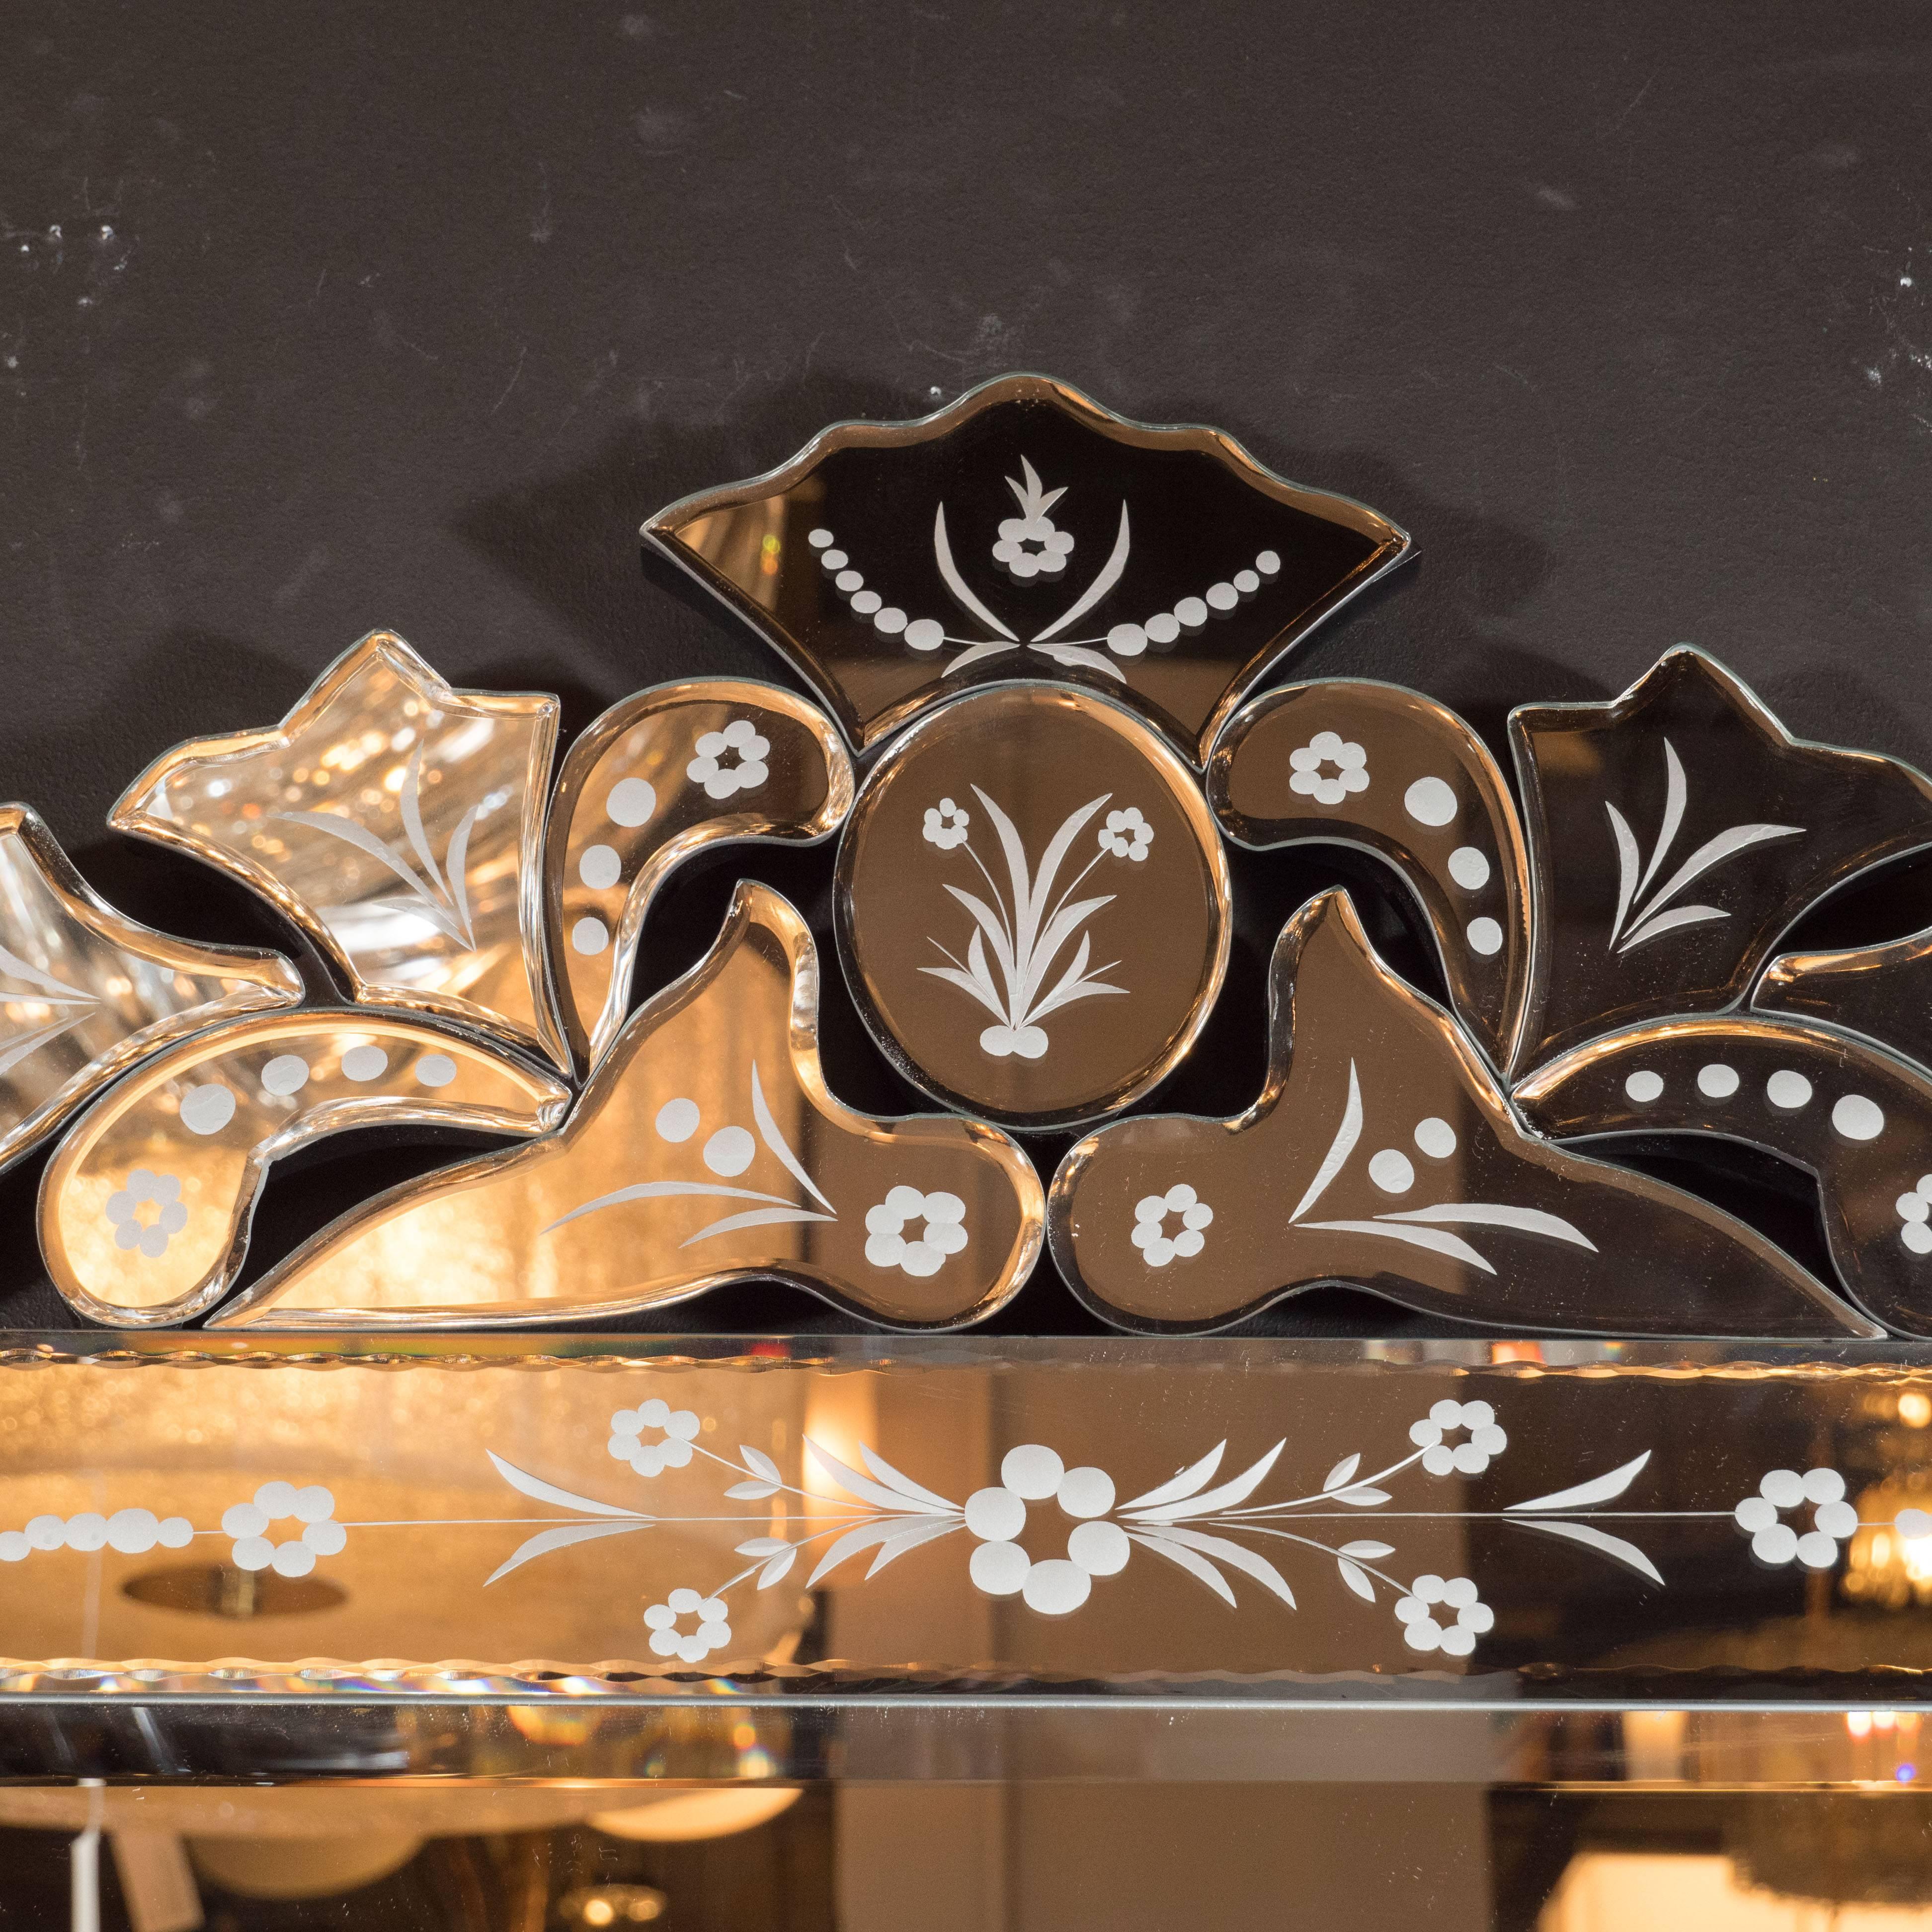 This glamorous 1940s Hollywood style Venetian mirror features stylized floral motifs throughout; reverse etched abstracted foliate forms adorning the top; and bevel and chain detailing circumscribing the interior and exterior perimeters of the